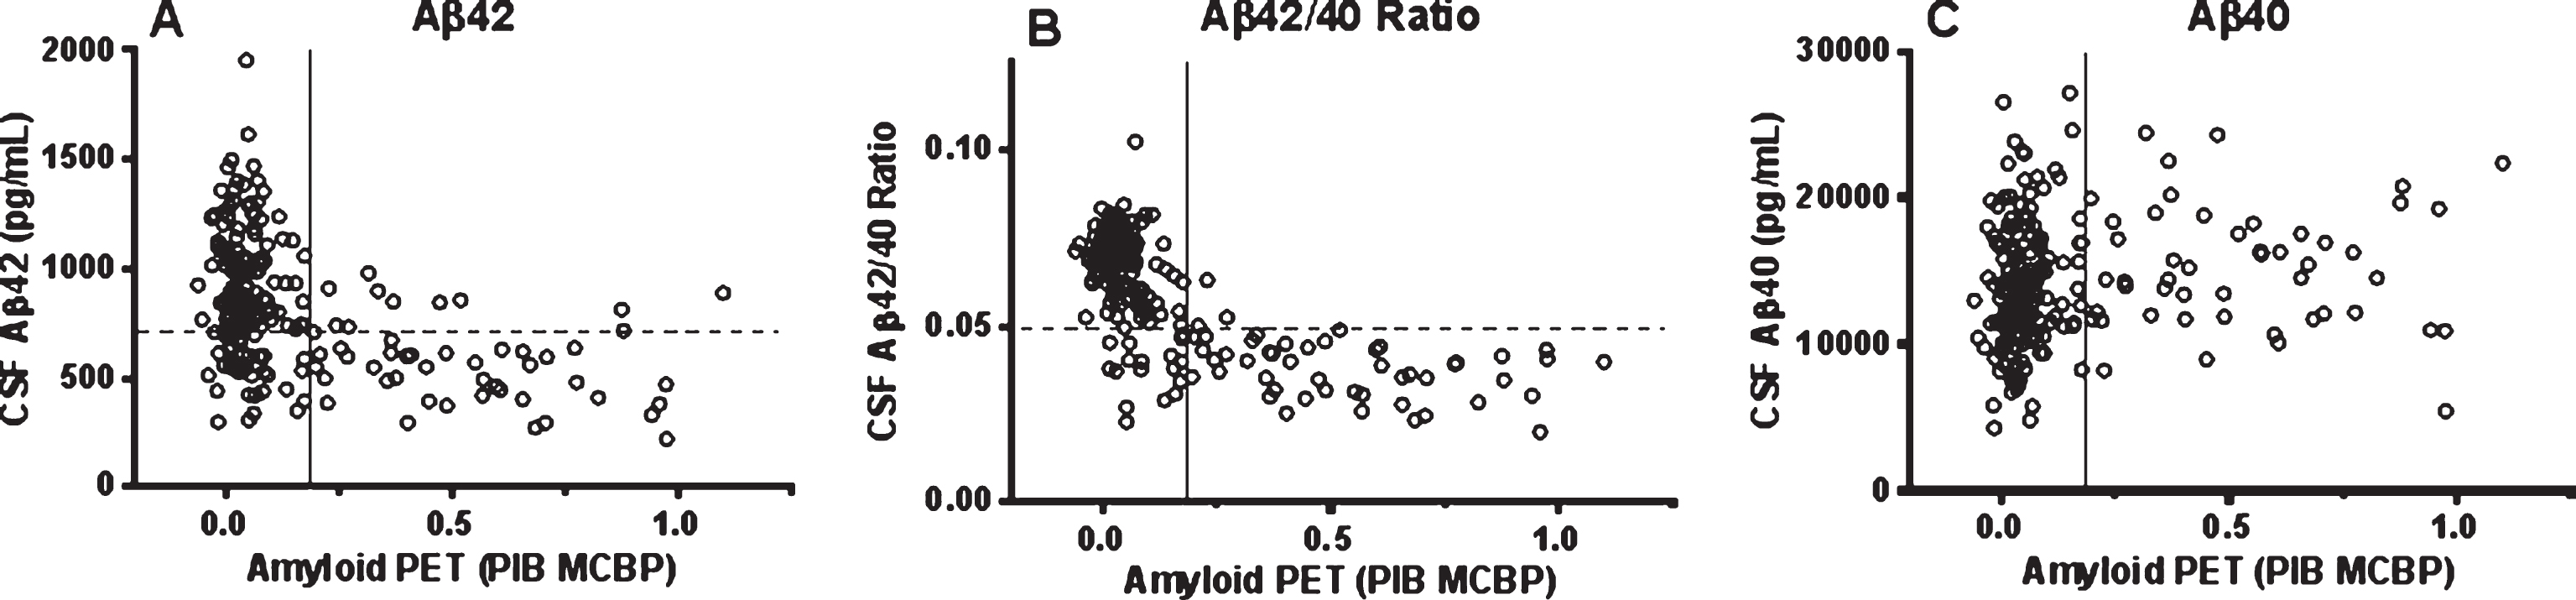 Scatterplots of cortical amyloid PET load using [11C] PiB and concentrations of CSF Aβ42 (A), the Aβ42/40 ratio (B), and Aβ40 (C). Solid vertical line represents the a priori dichotomous cut-off for PiB positivity as published previously [28]. Dashed horizontal lines on panels A and B represent the best-performing cut-offs of the respective CSF biomarkers calculated in the present study.